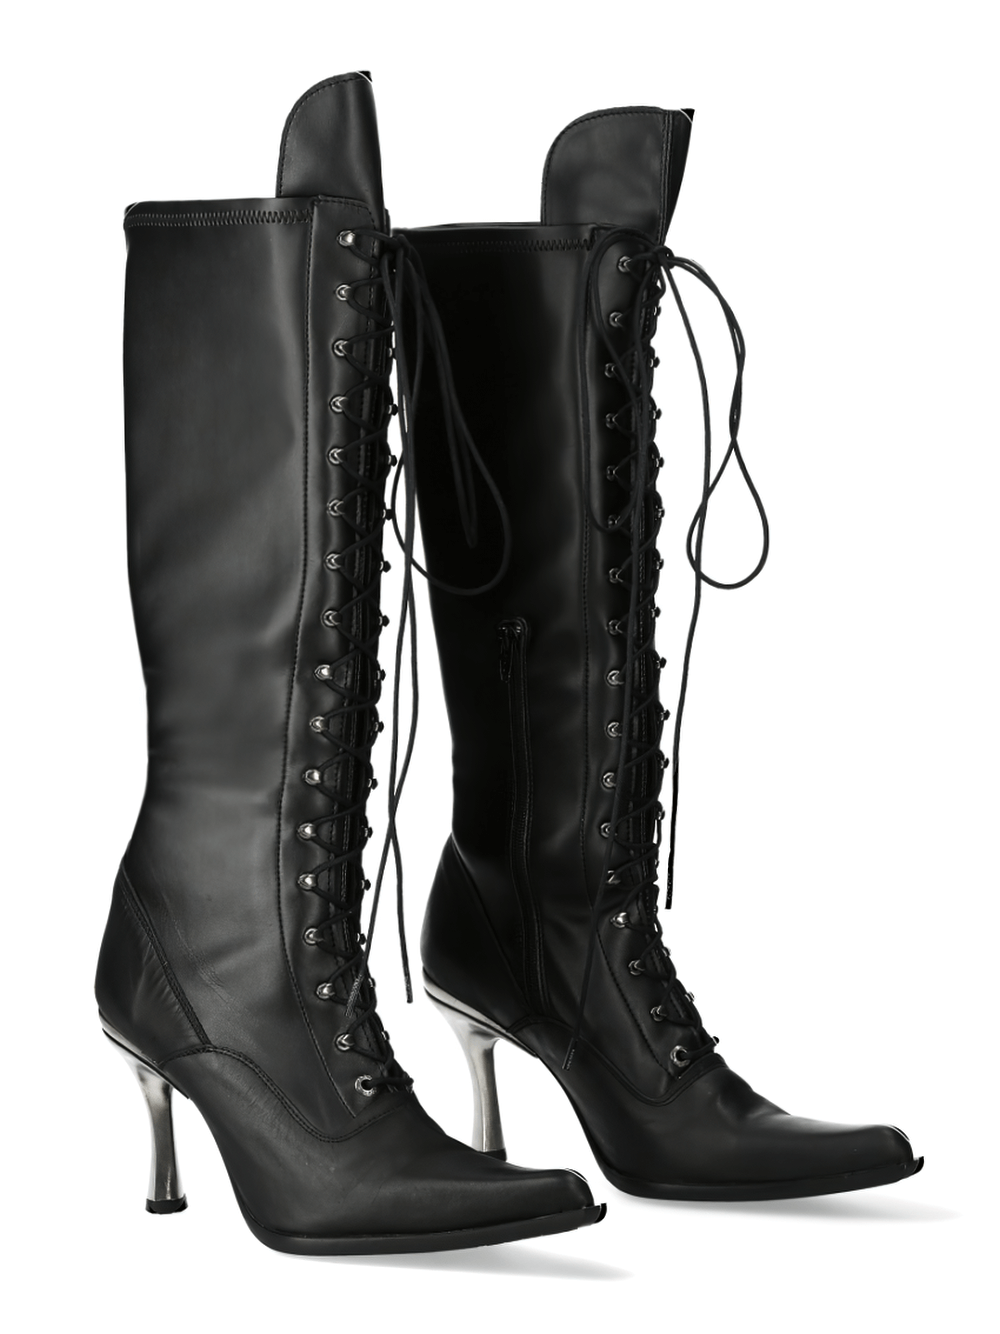 NEW ROCK Black Gothic Tall Laced Heeled Boots